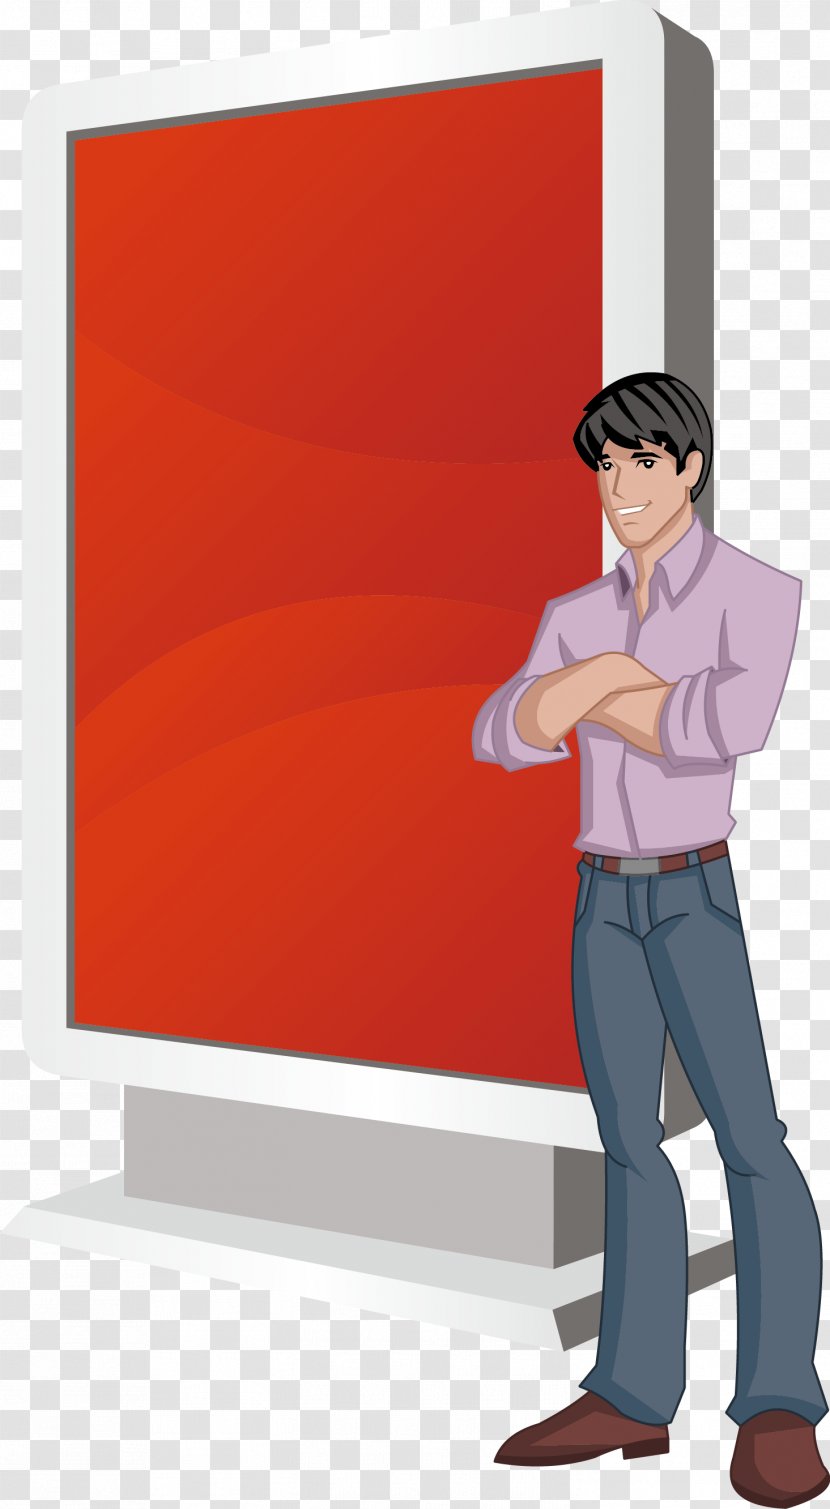 Cartoon Character Euclidean Vector - Red - Business Person Billboard Transparent PNG